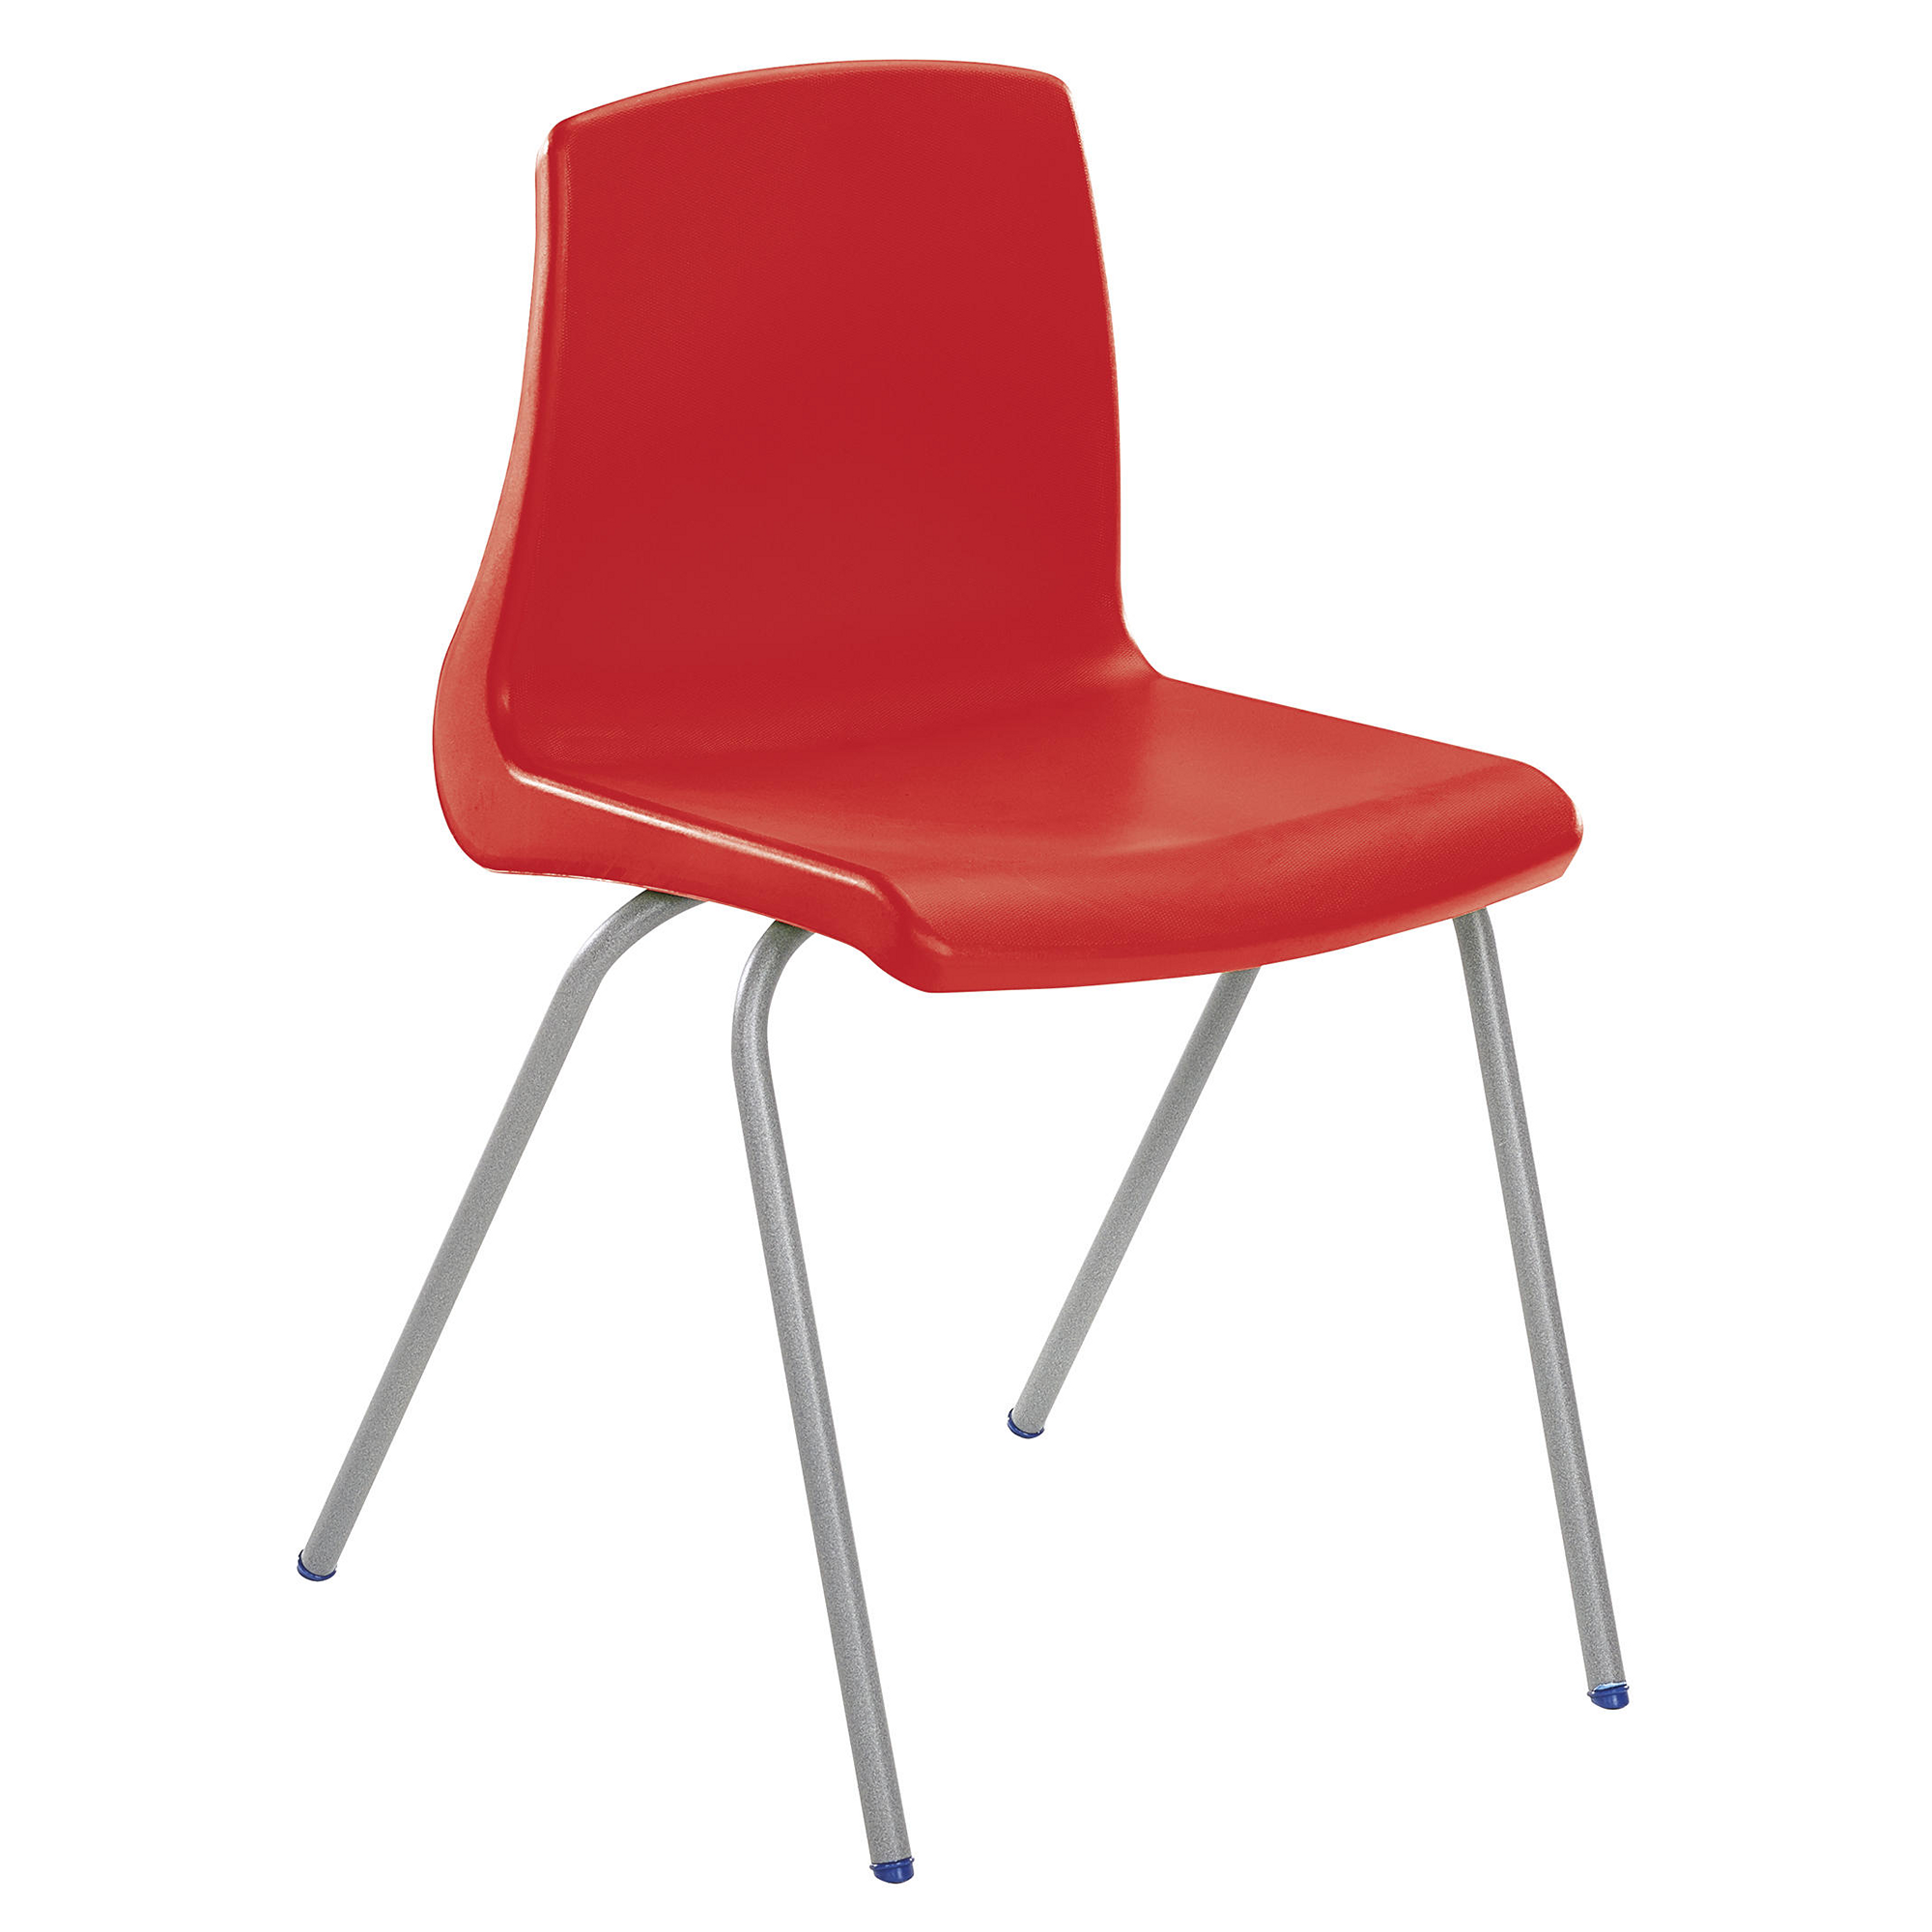 NP Chairs H310mm - Red